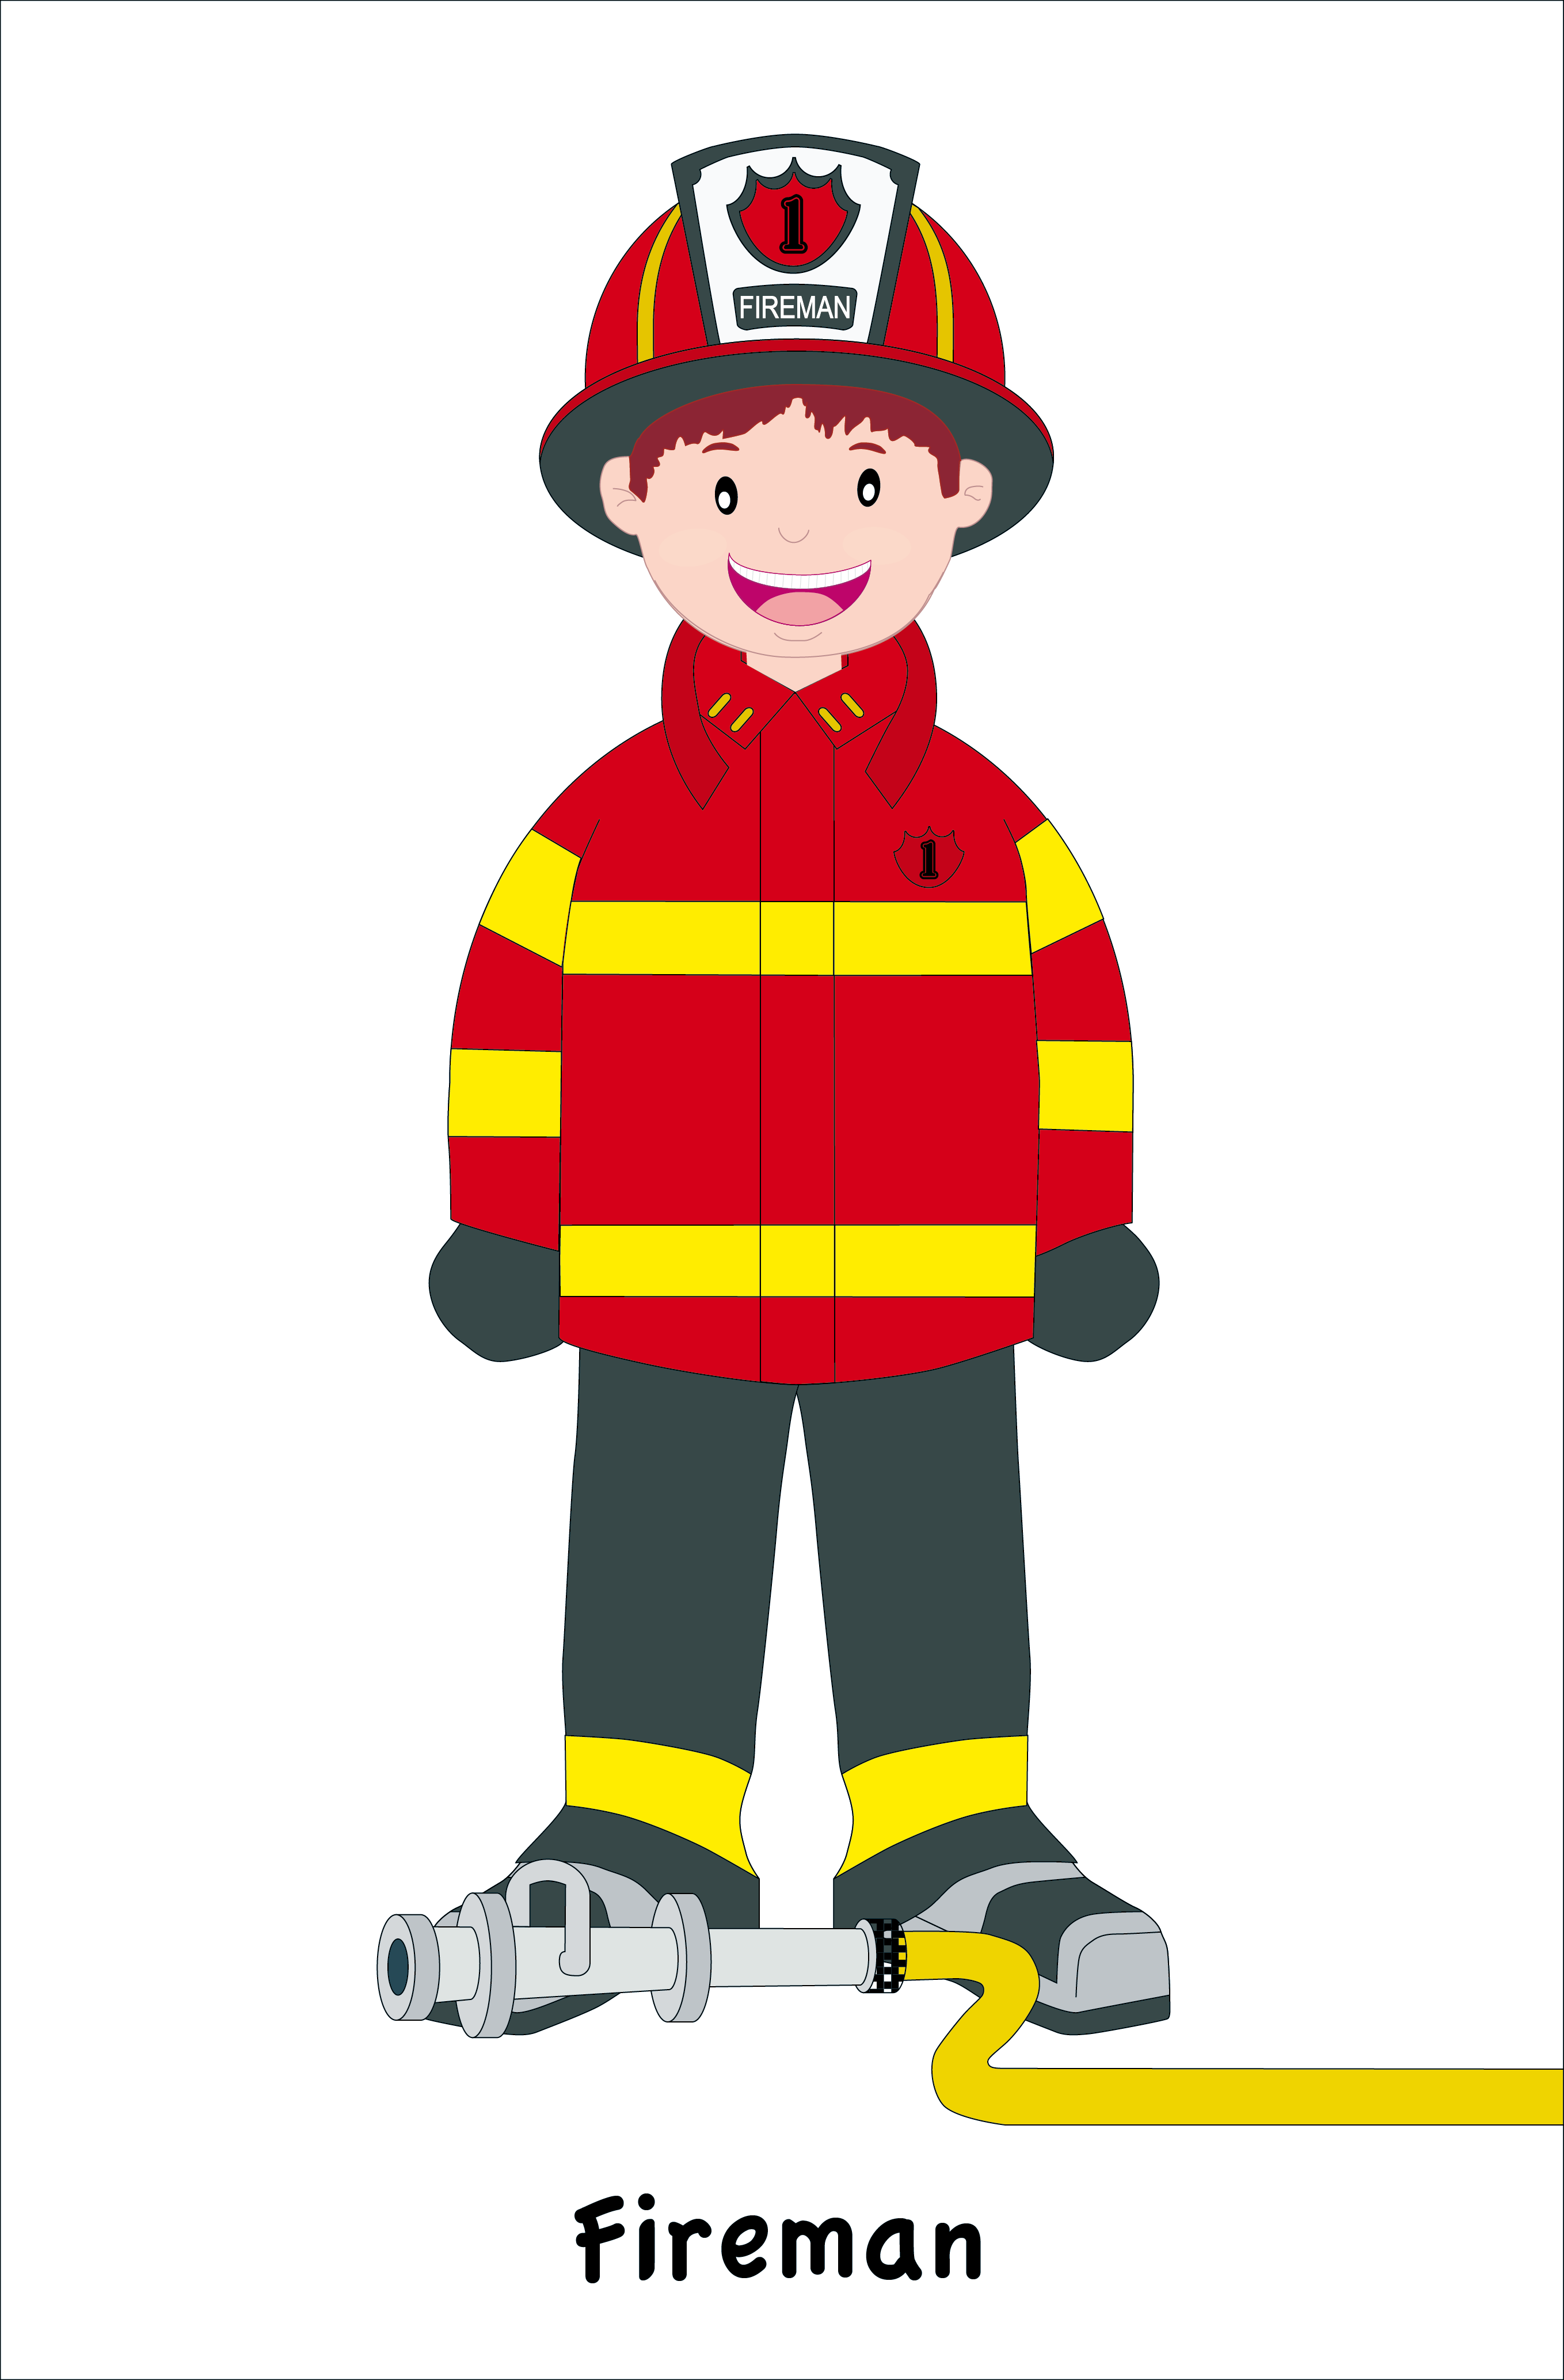 Fireman clipart the cliparts databases 4